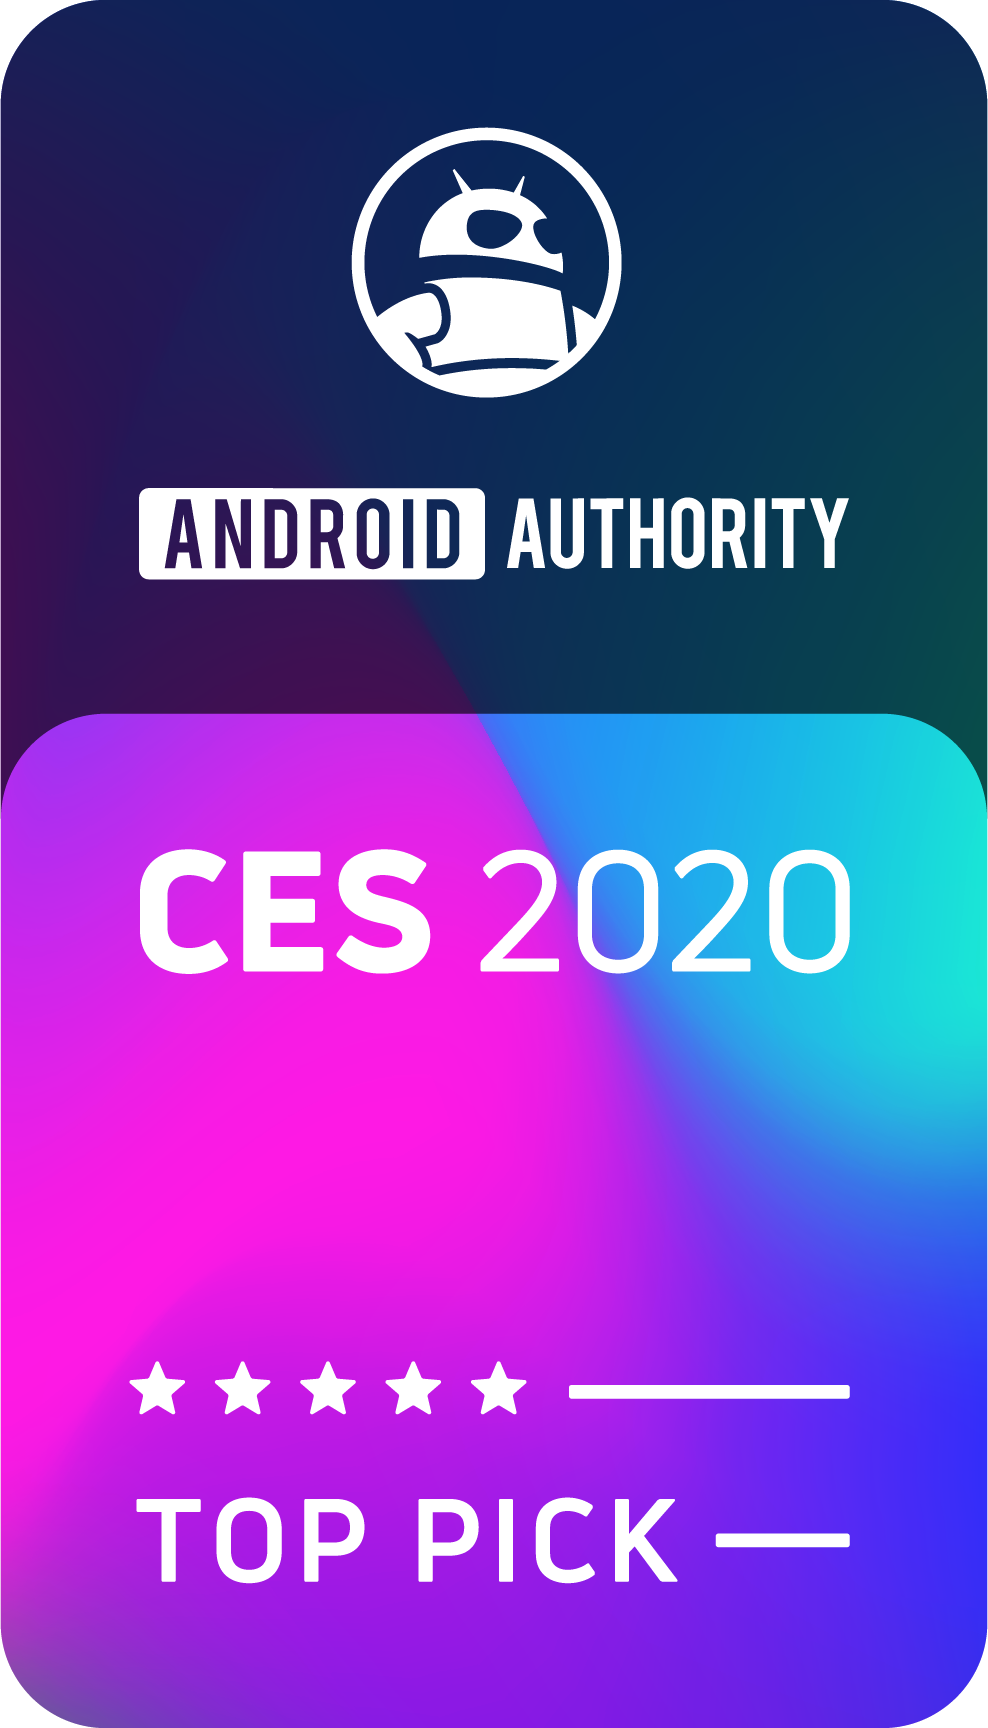 Android Authority CES 2020 Top Pick award badge